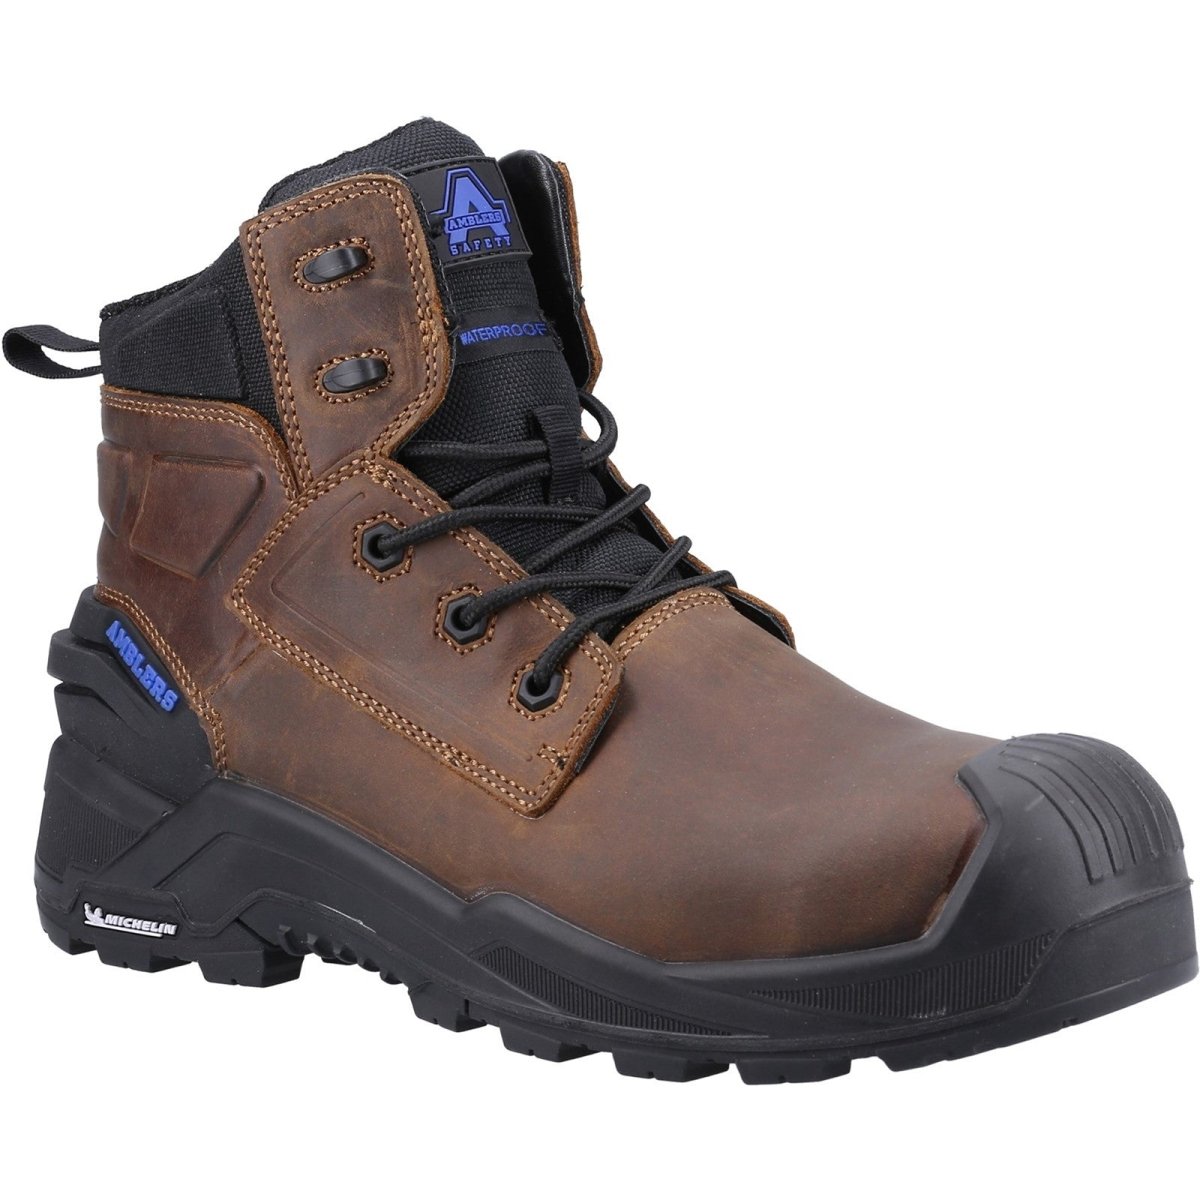 Amblers AS980C Crusader S7 Waterproof Safety Boots - Shoe Store Direct